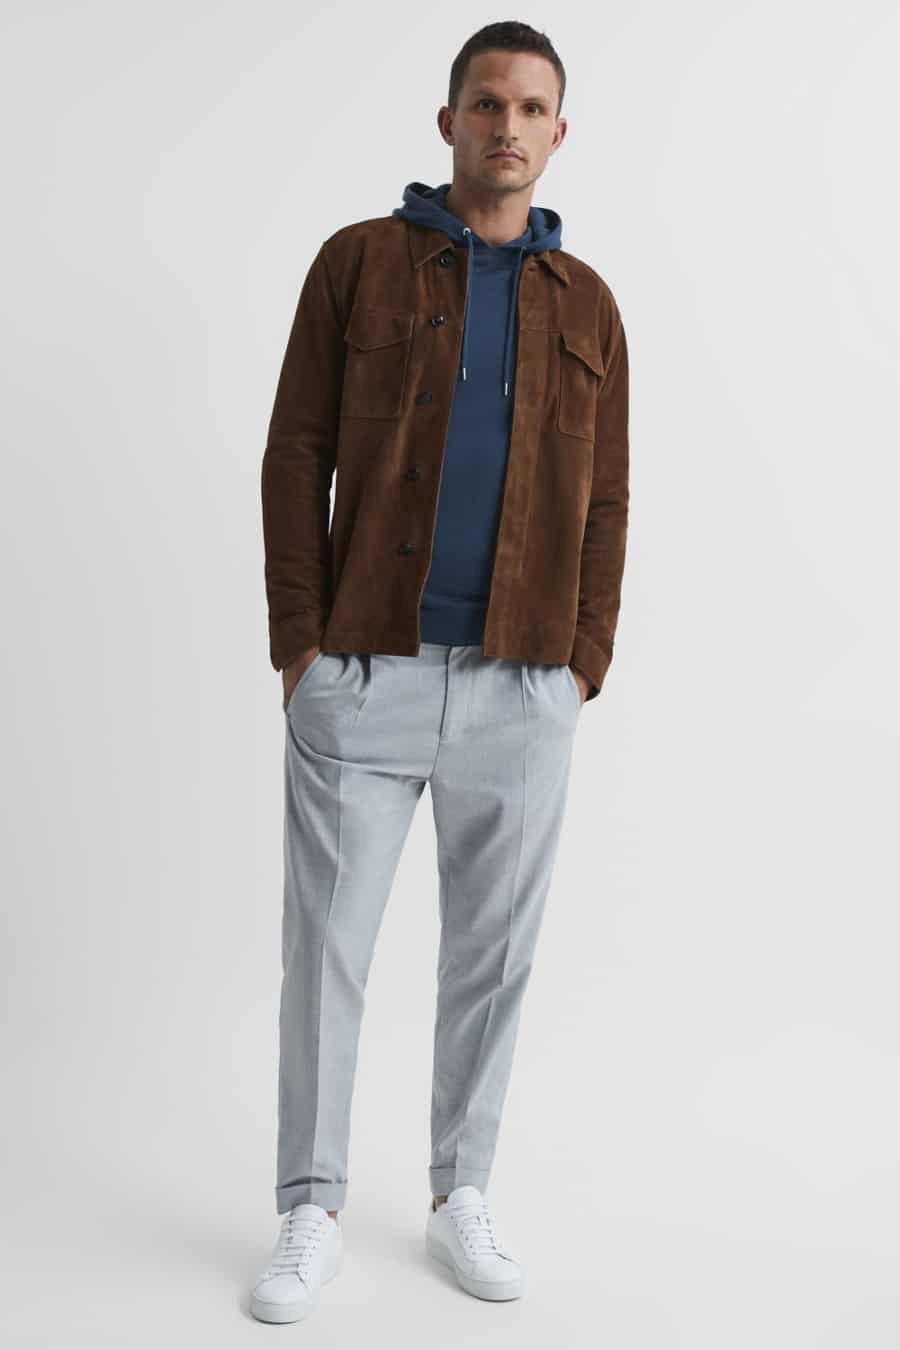 Men's grey pleated trousers, blue hoodie, brown suede jacket and white sneakers outfit